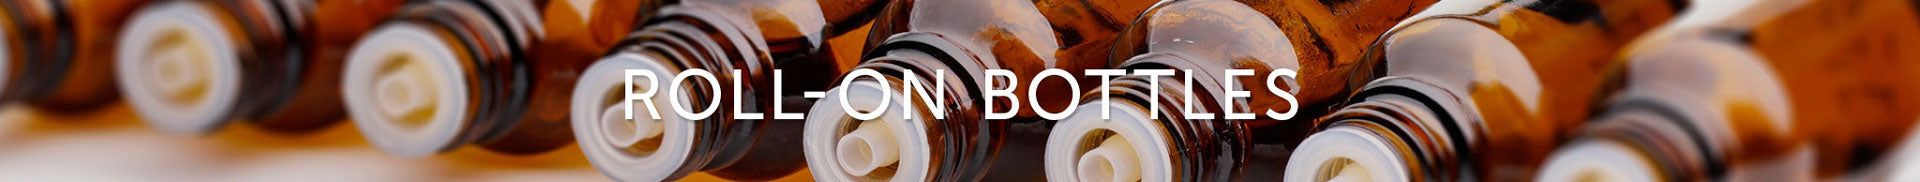 "Roll-on Bottles" header with amber glass vials in the background.